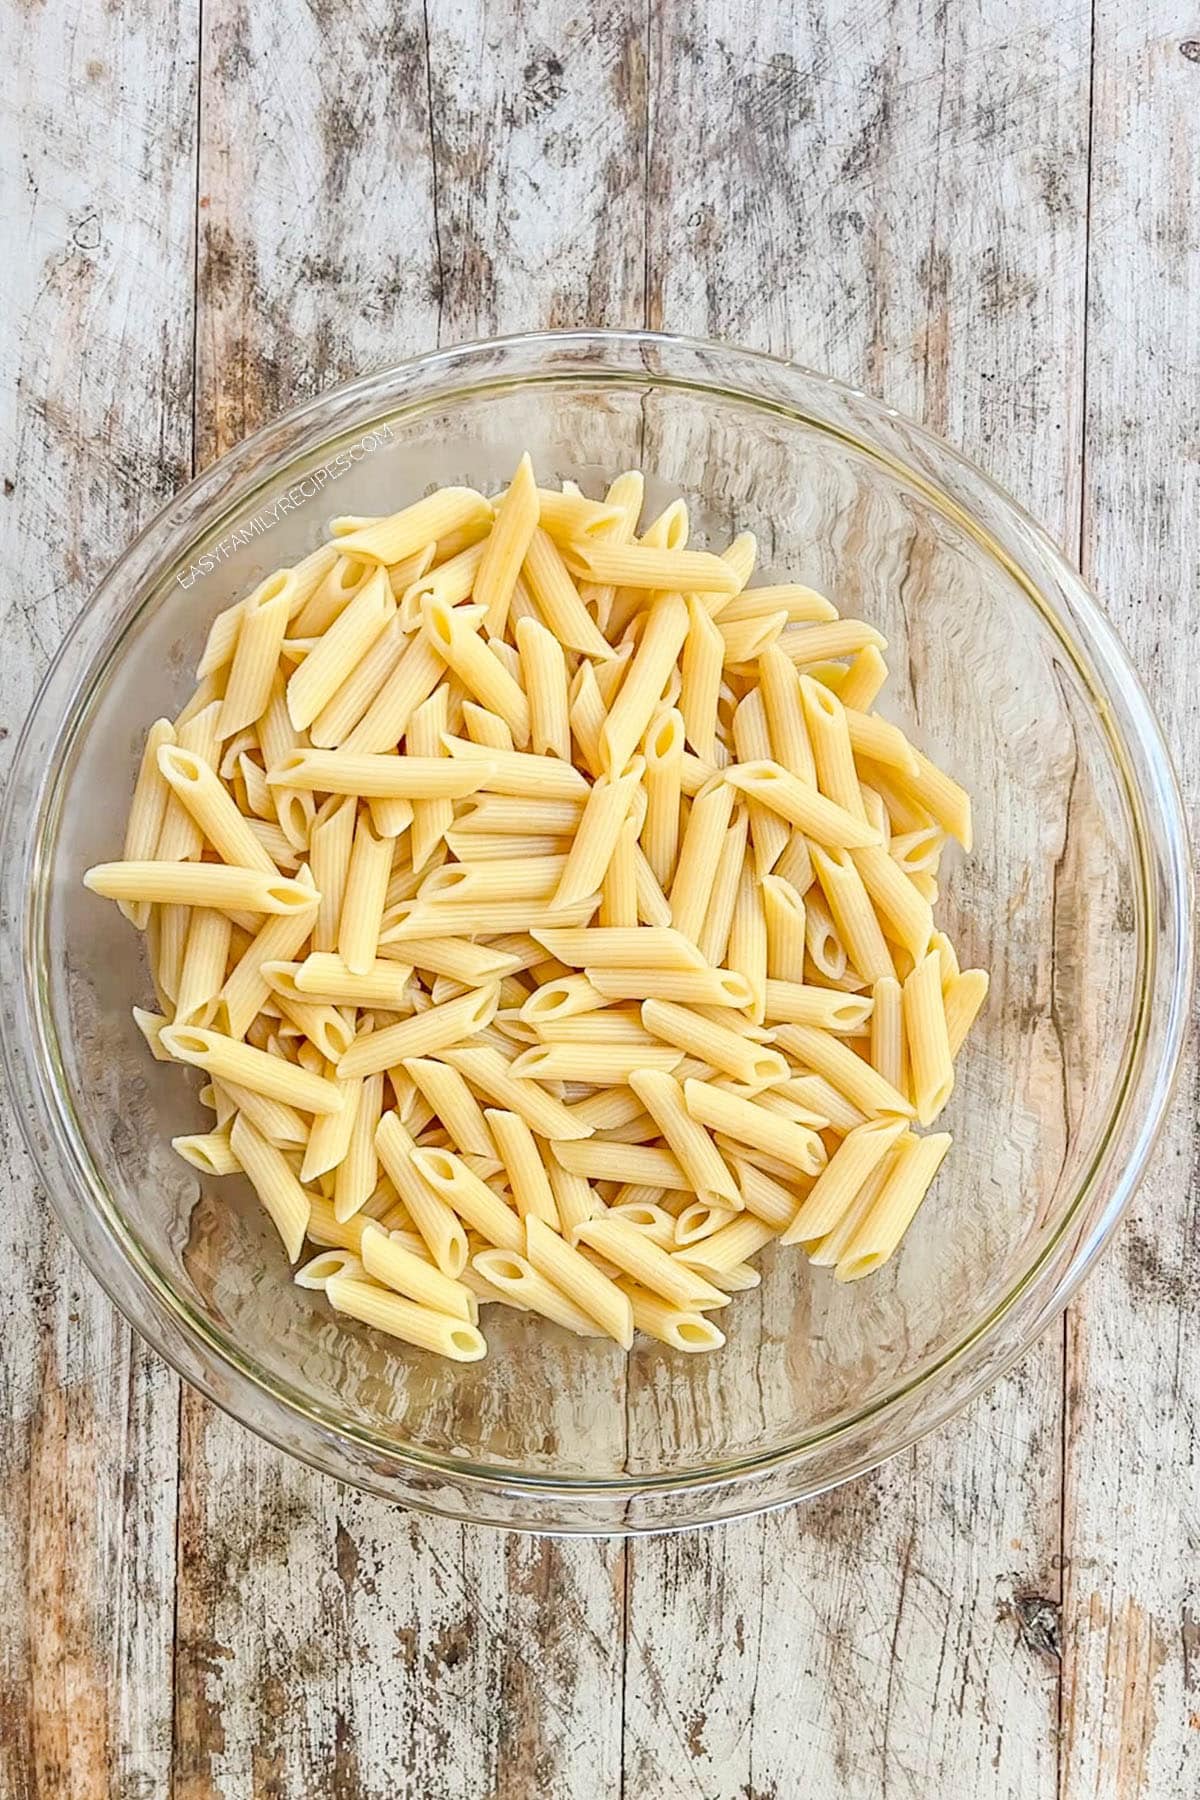 Pasta in a clear glass bowl, ready to be made into Italian Grinder Pasta Salad